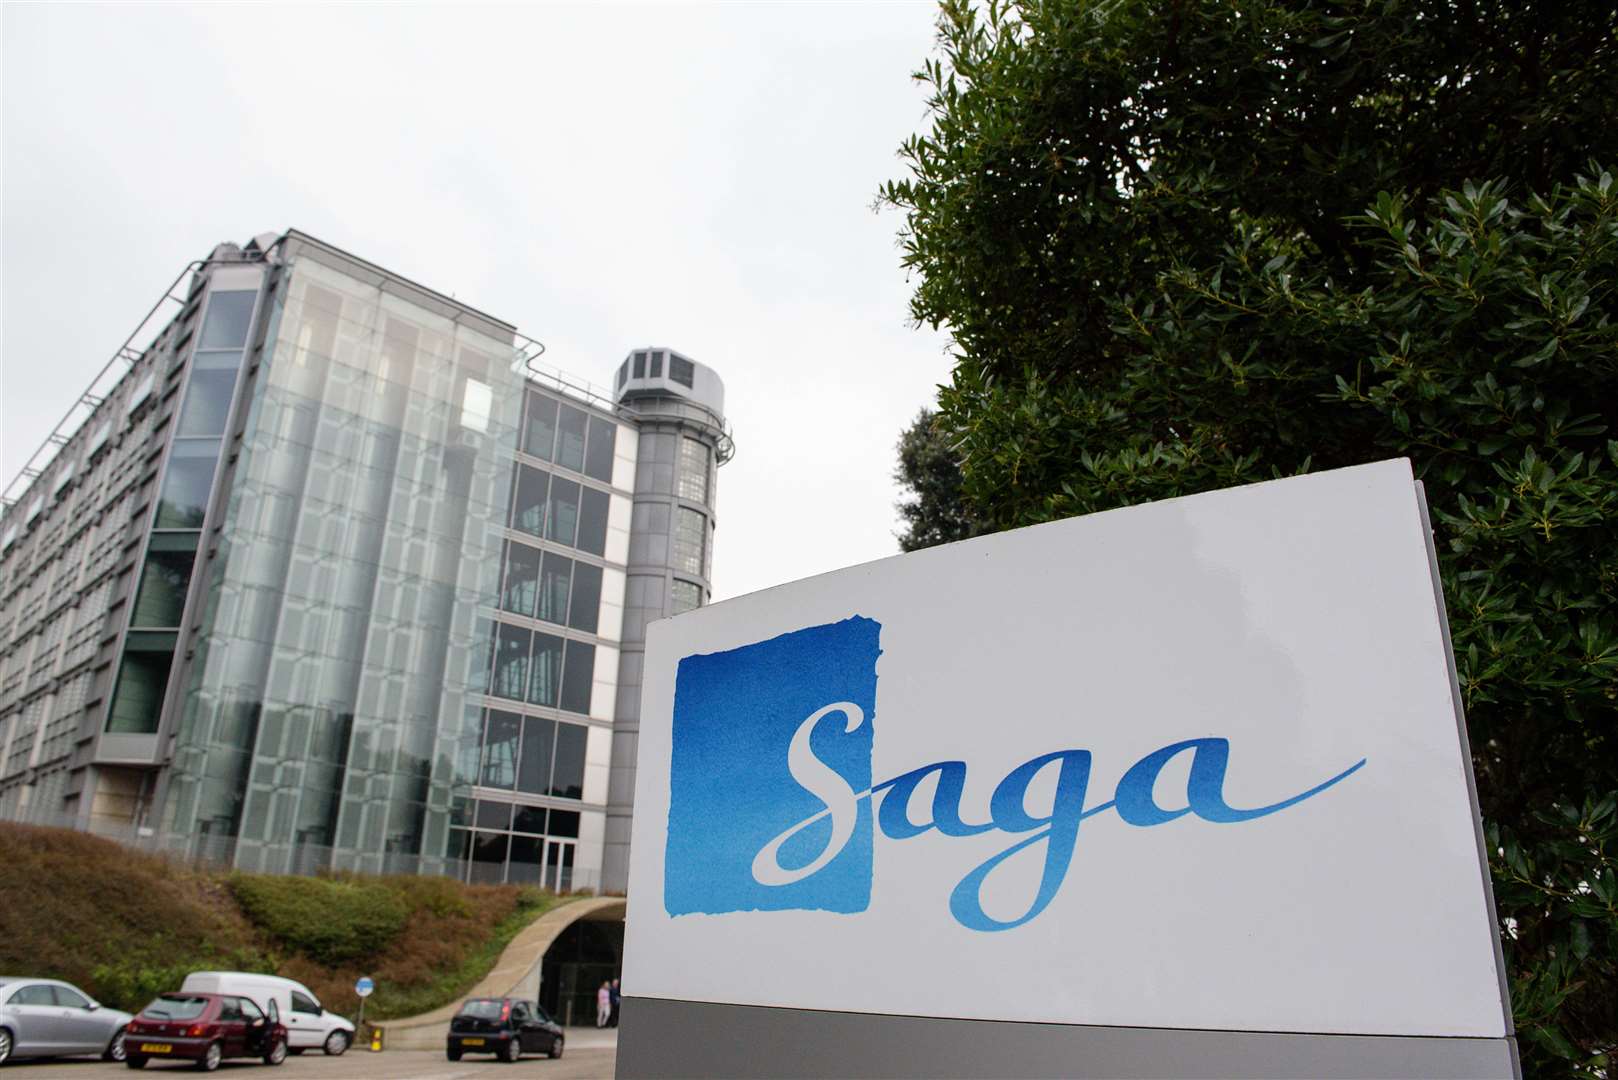 Saga's offices in Folkestone - it hopes the travel industry will swiftly revive